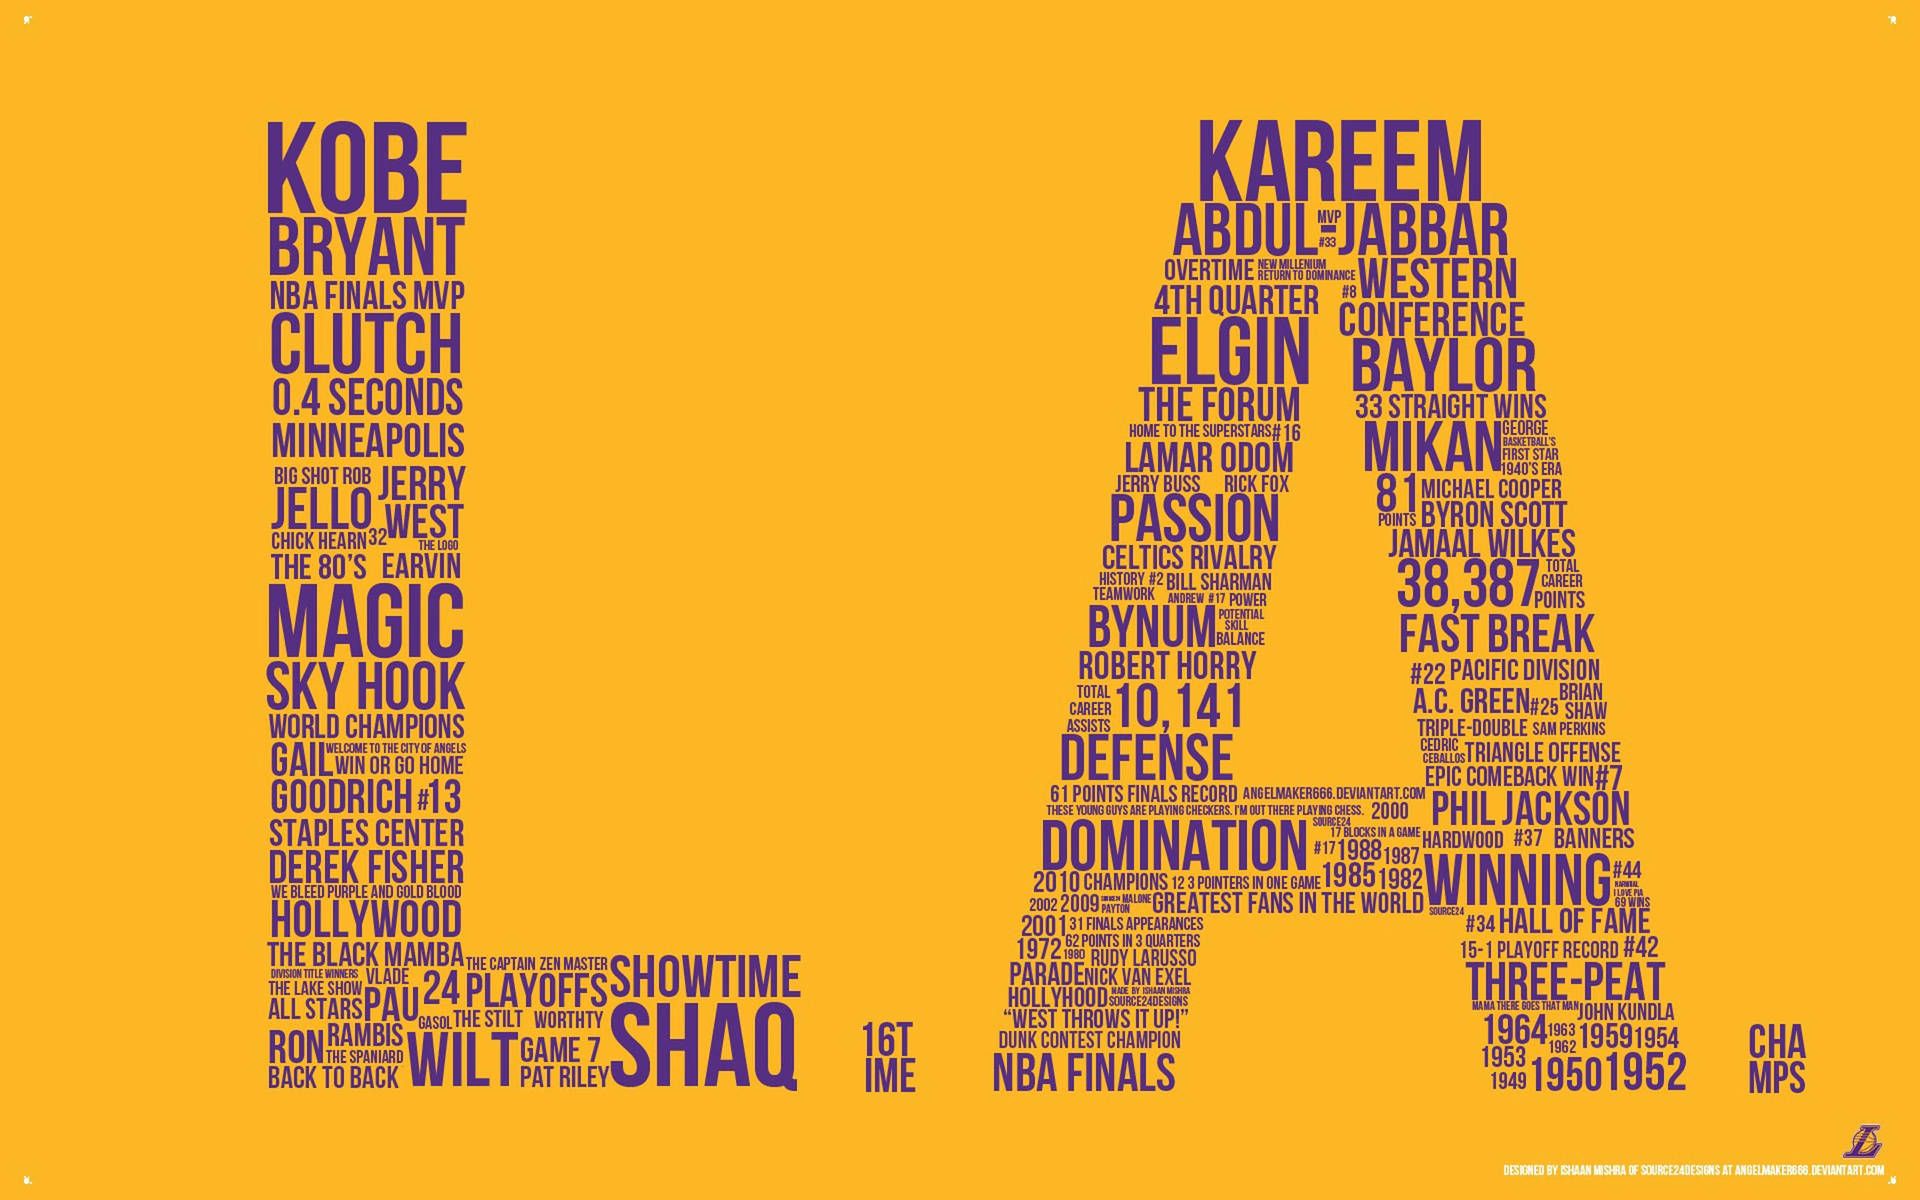 A poster of Kobe Bryant's best moments and records. - Los Angeles Lakers